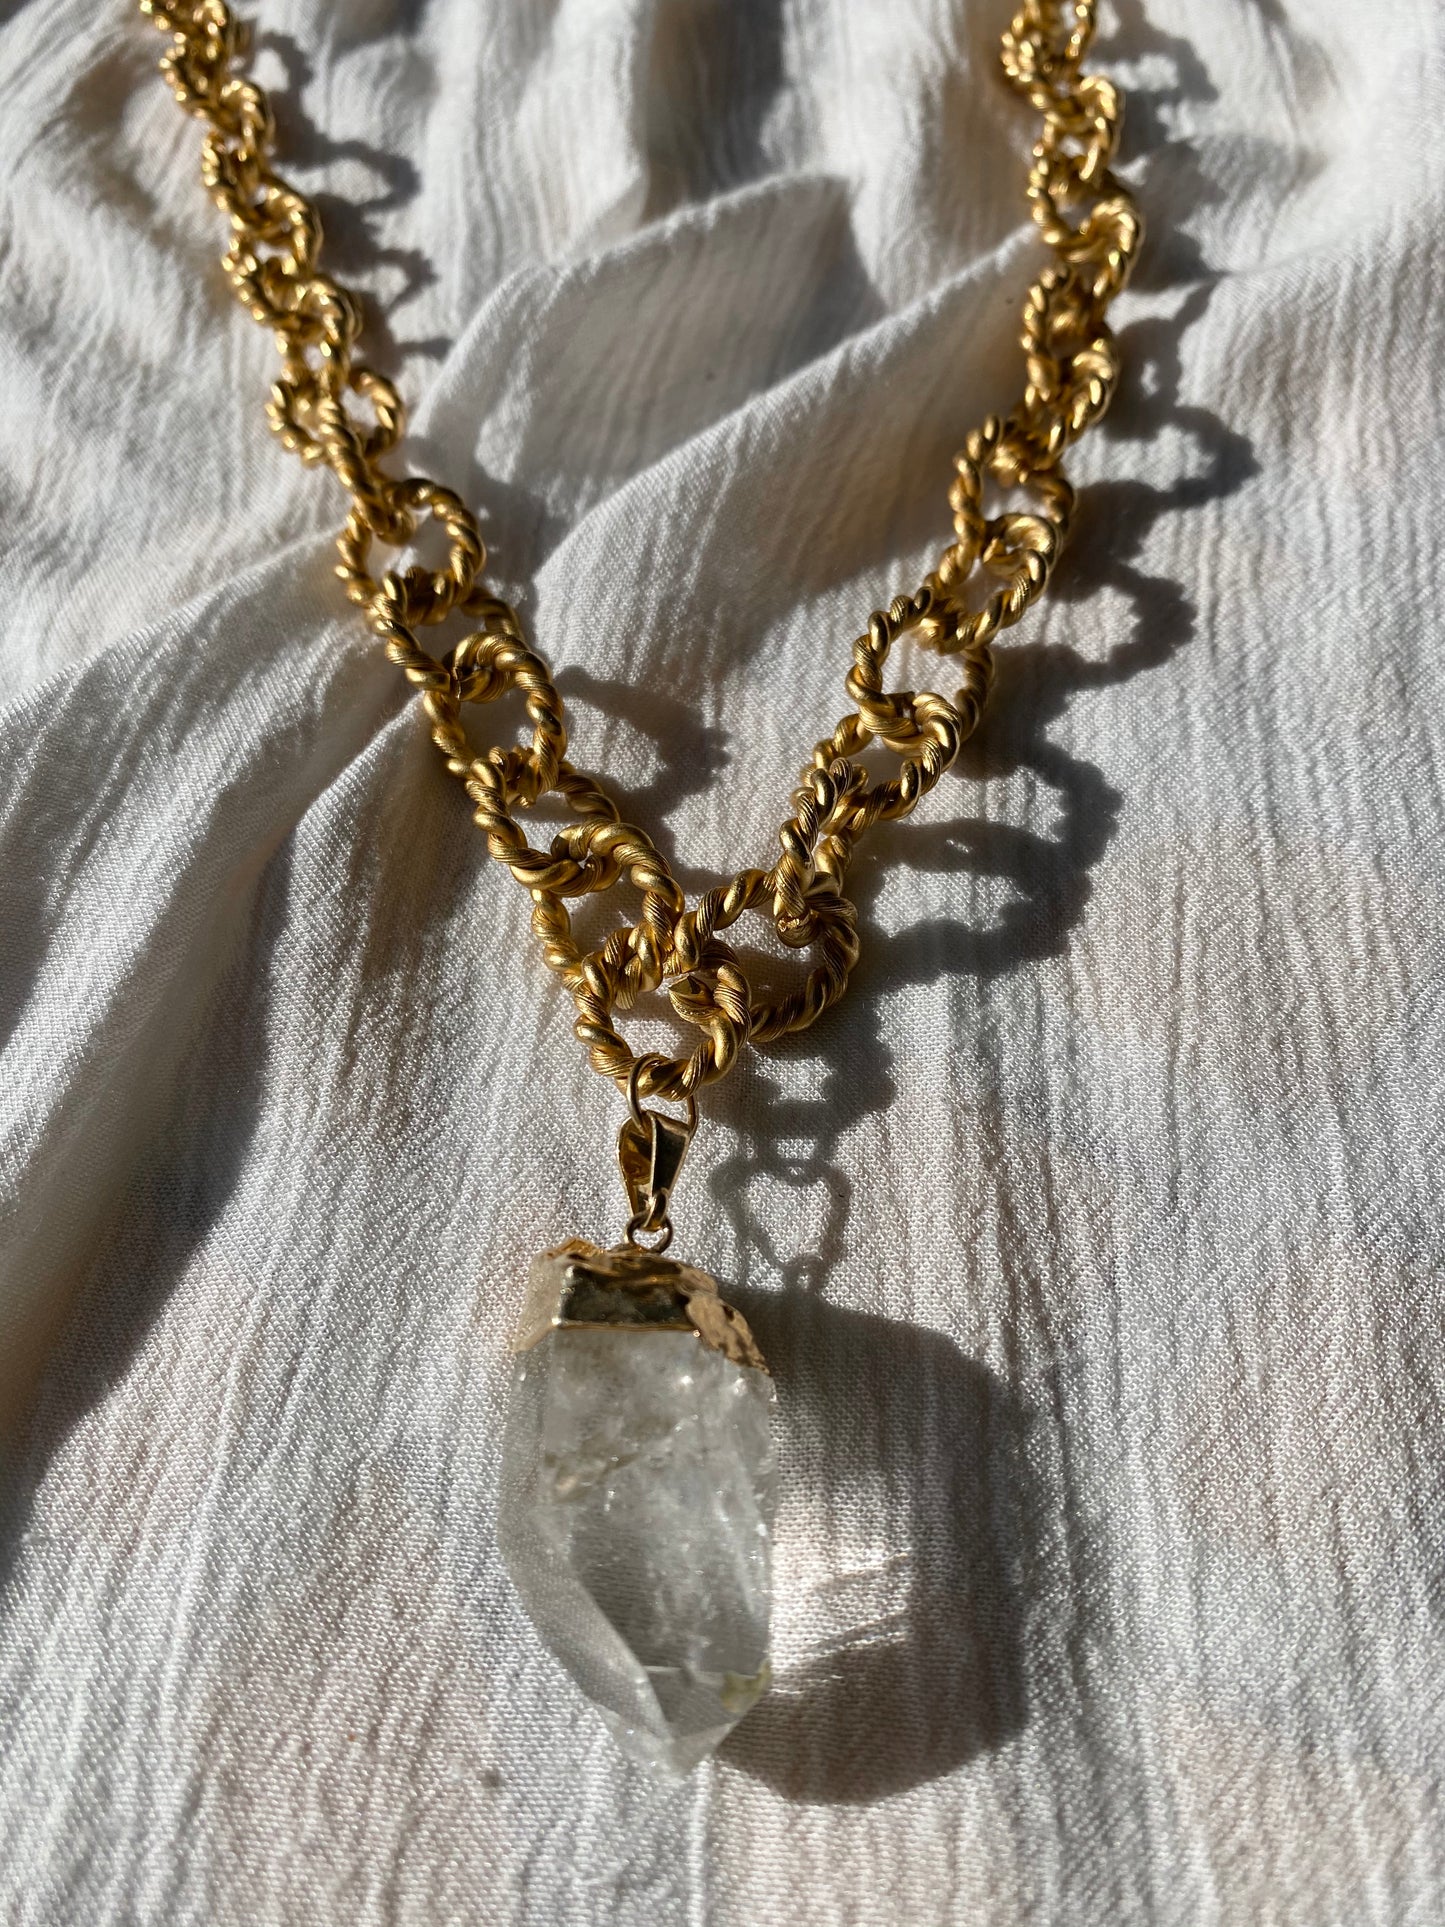 Brushed Golden Crystal Necklace with Clear Quartz 30"L Crystal 1.5"L - Ola Wyola